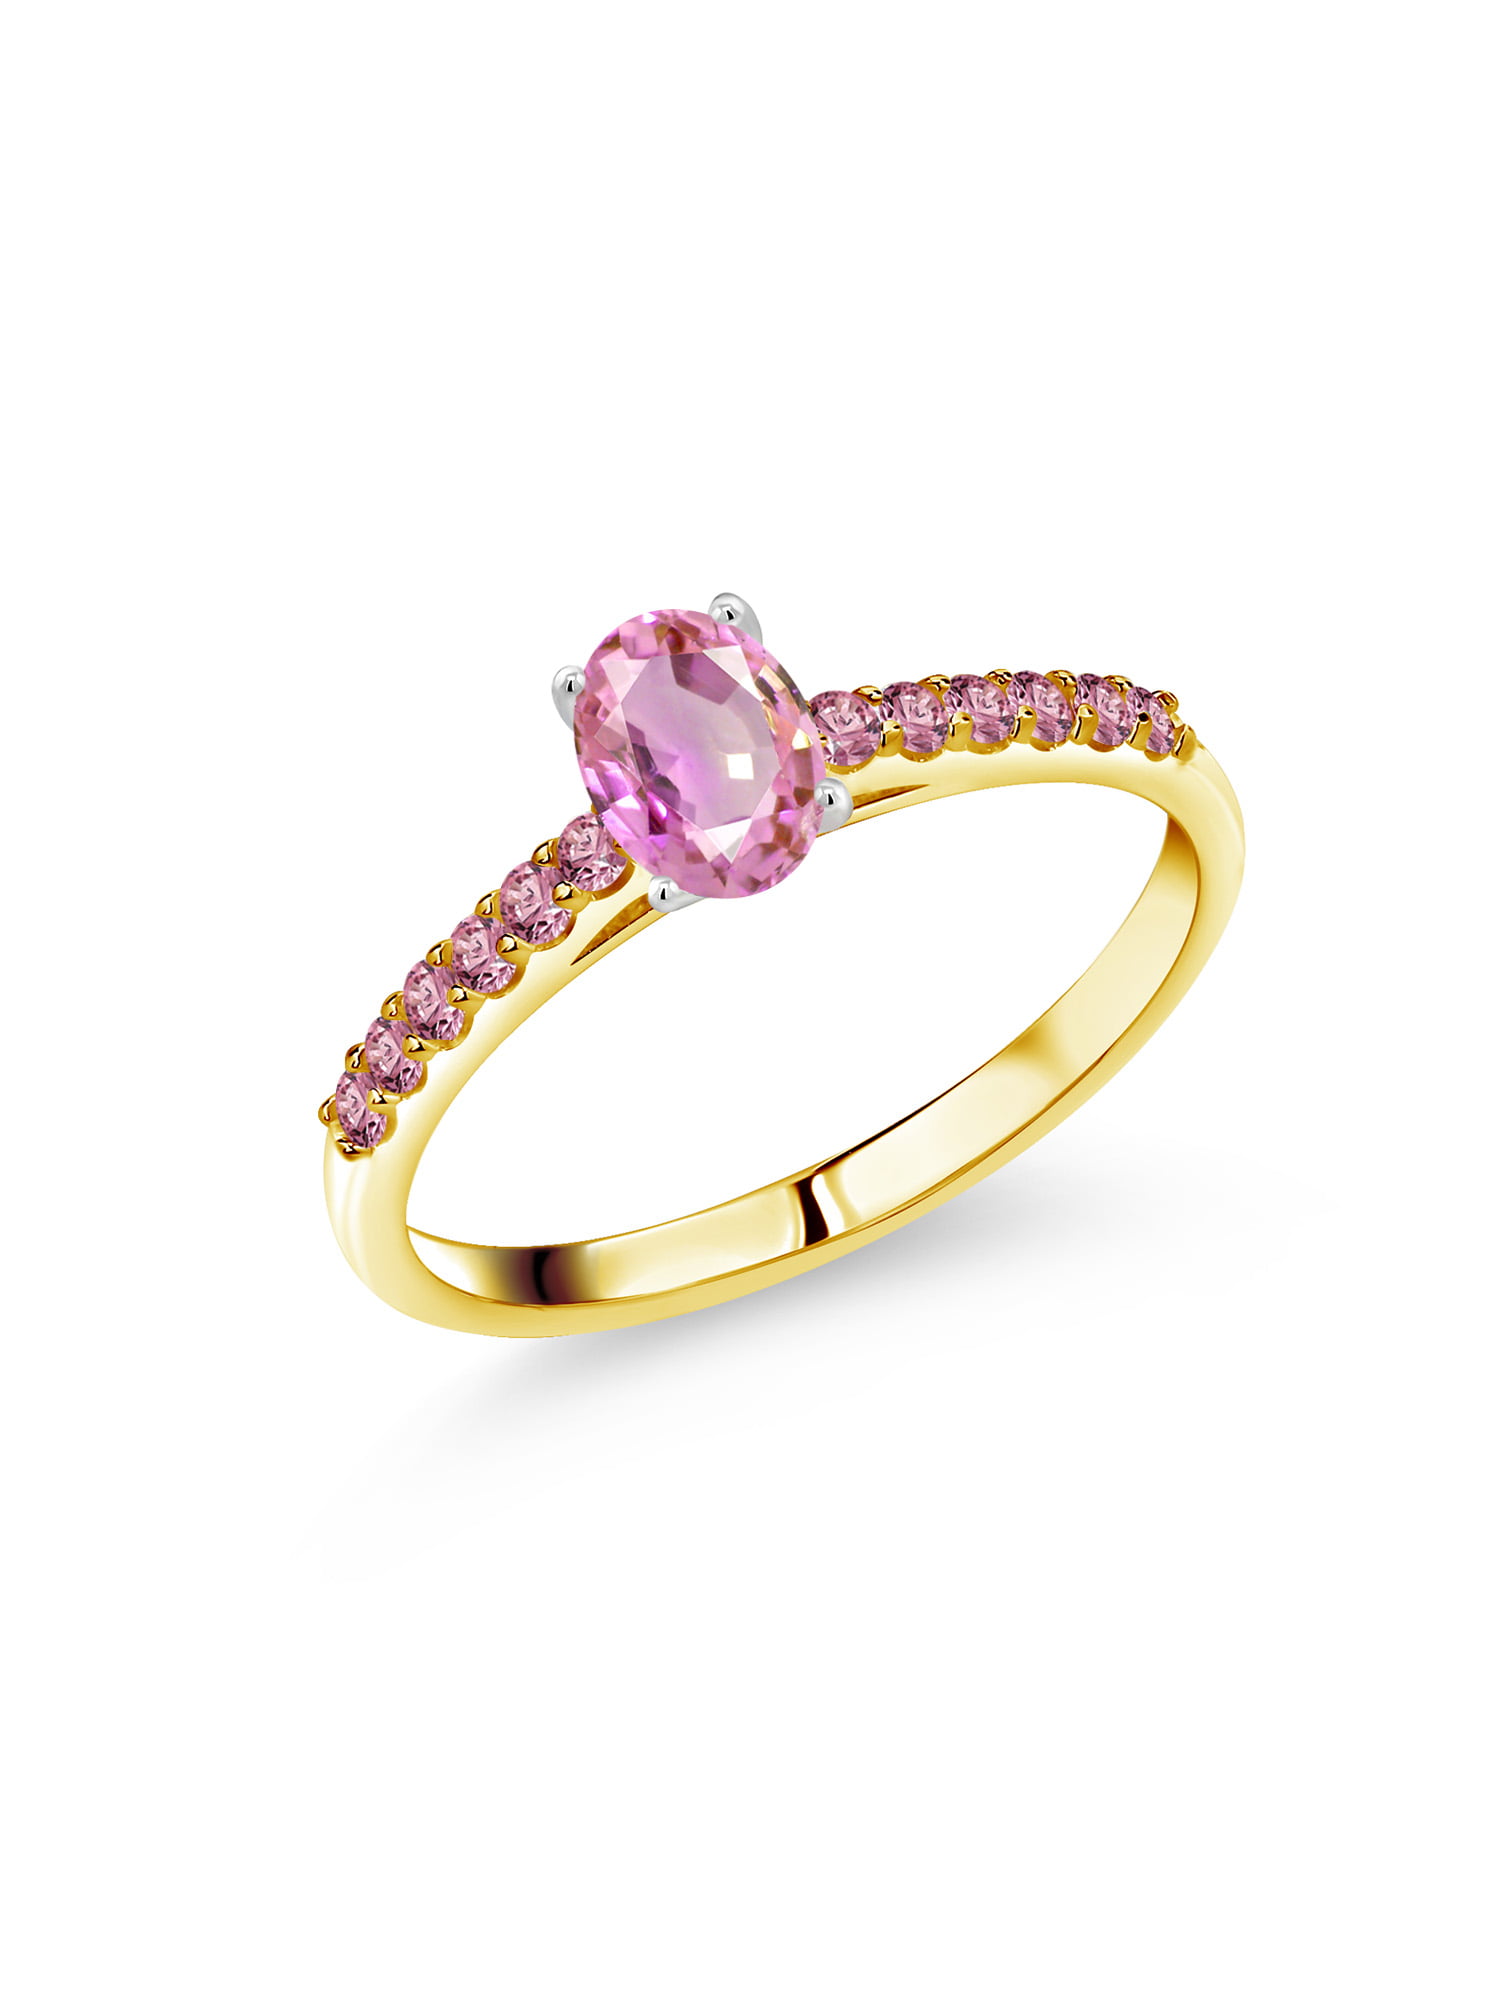 14k Yellow Gold Plated 1.00 Ct Pink Sapphire and CZ Simulated Diamond Bridal Set Engagement Ring for Women